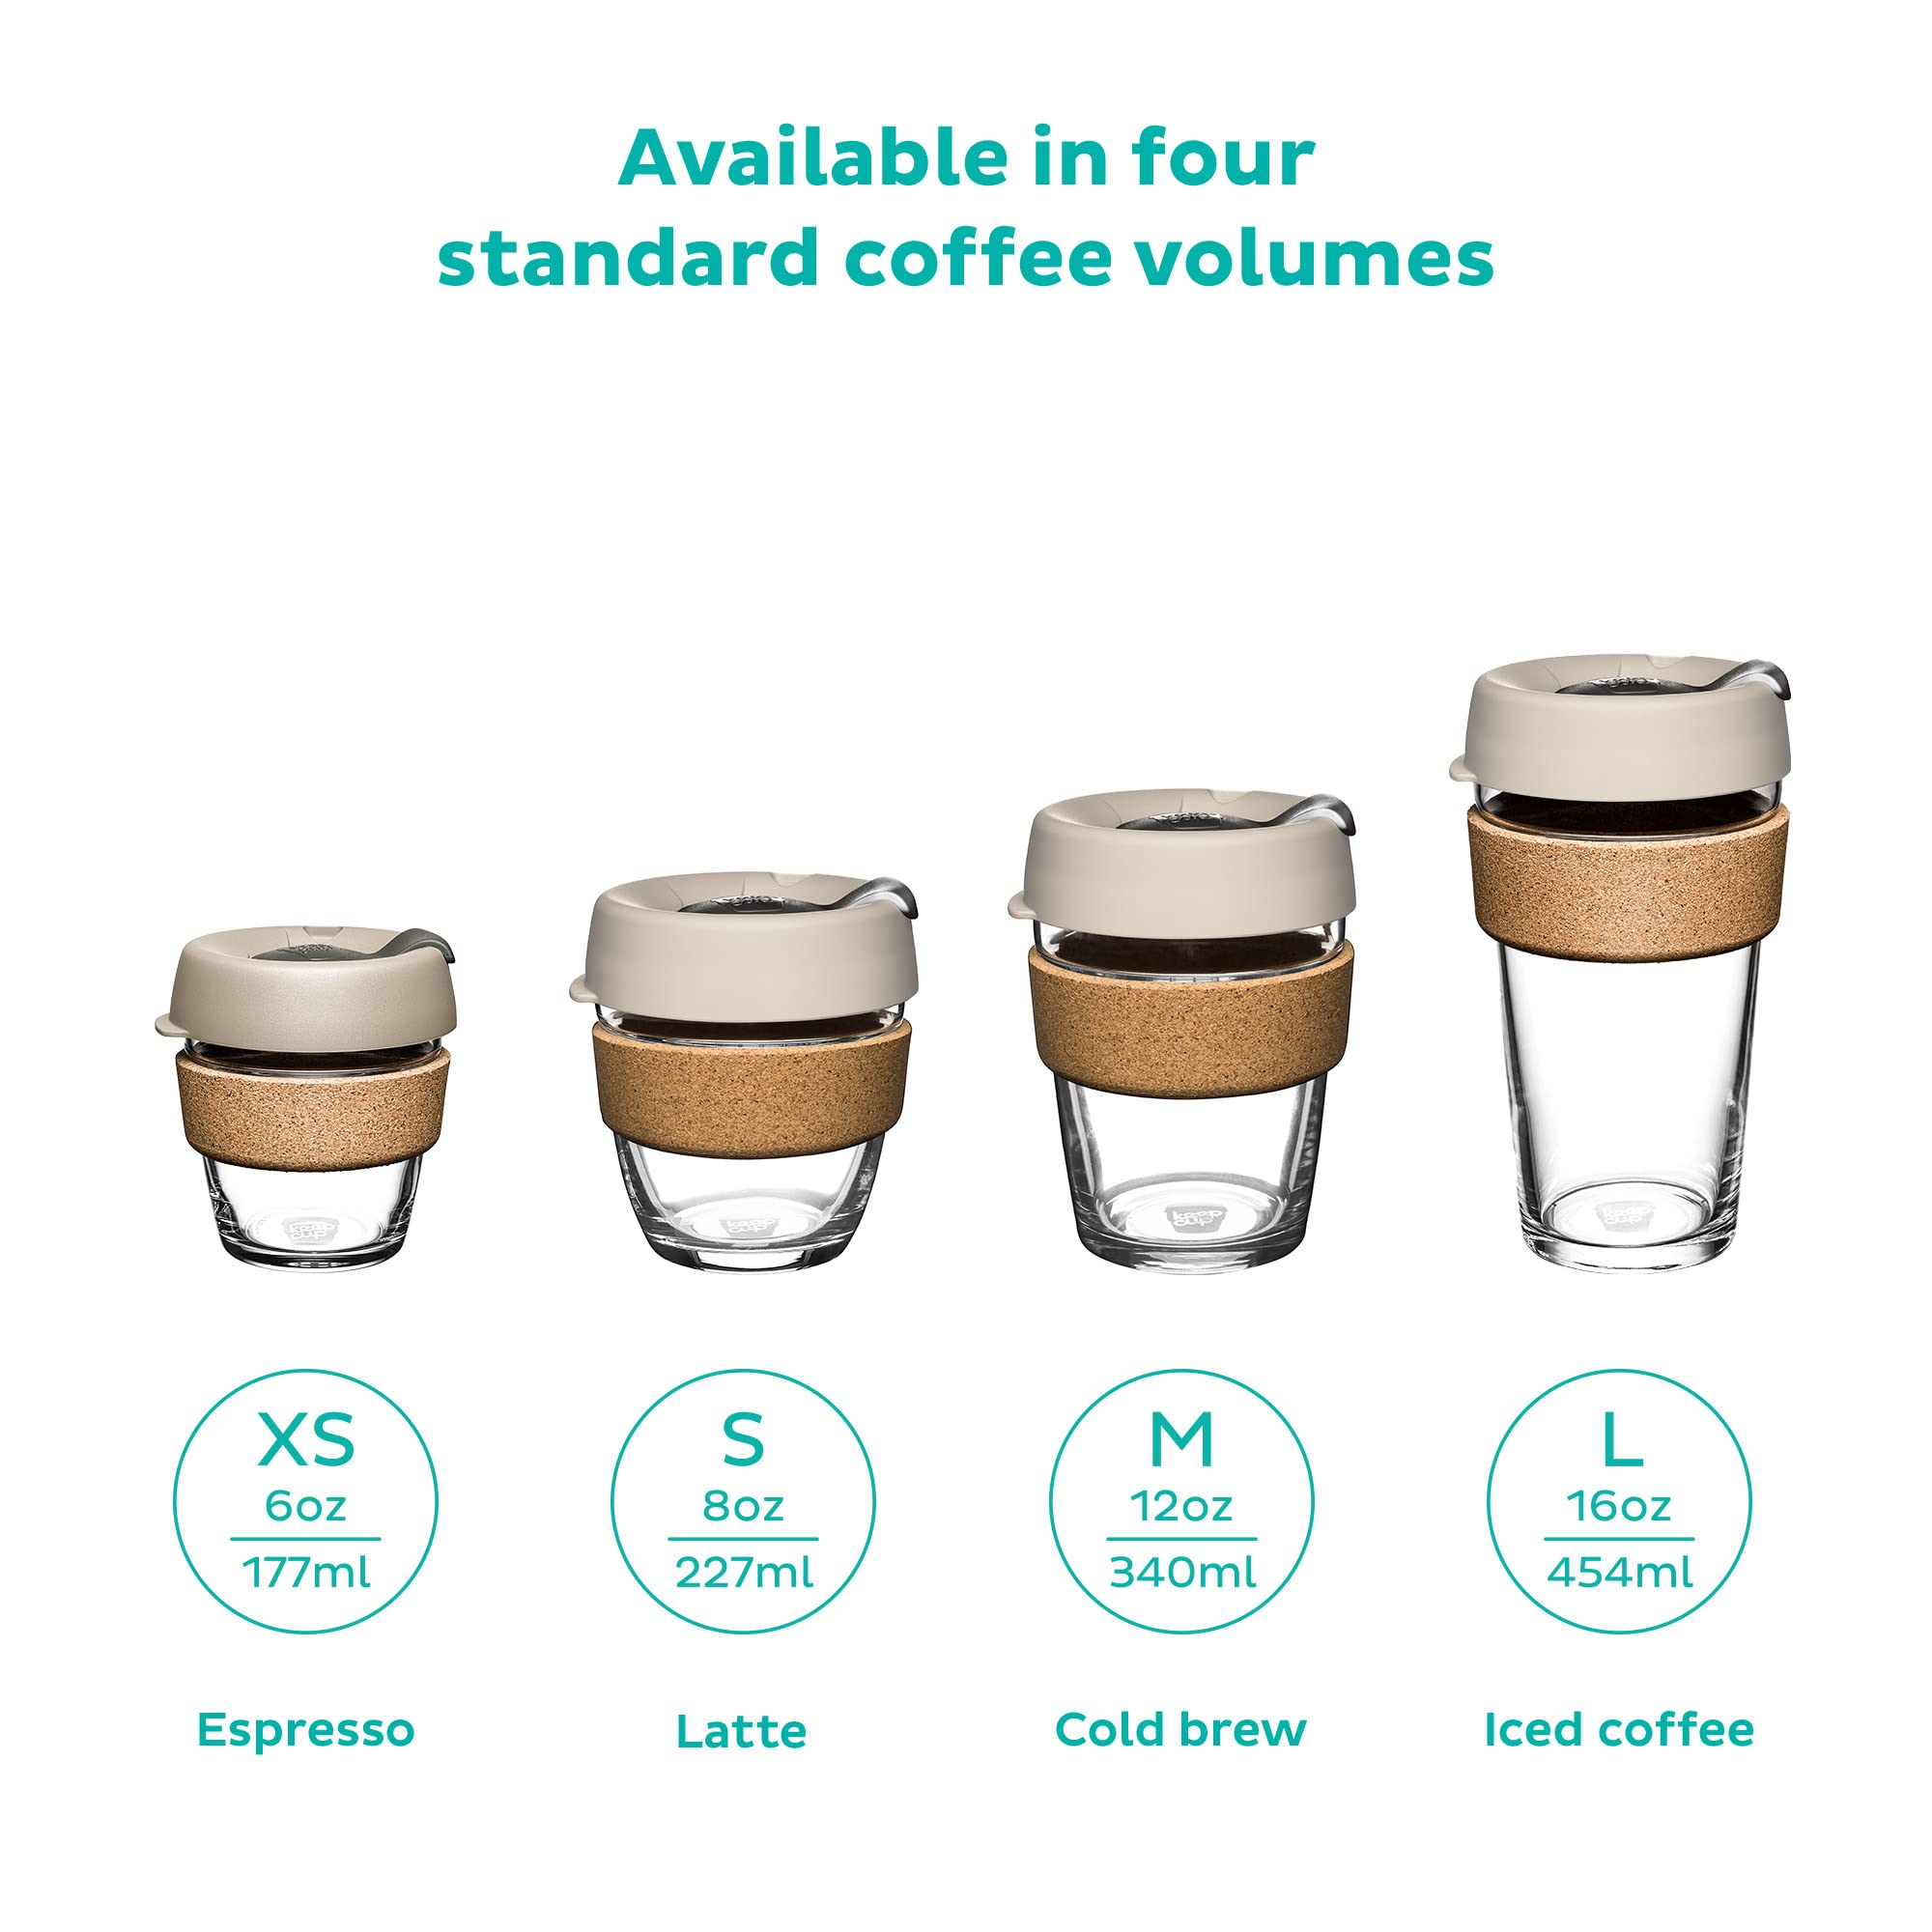 KeepCup Reusable Tempered Glass Coffee Cup